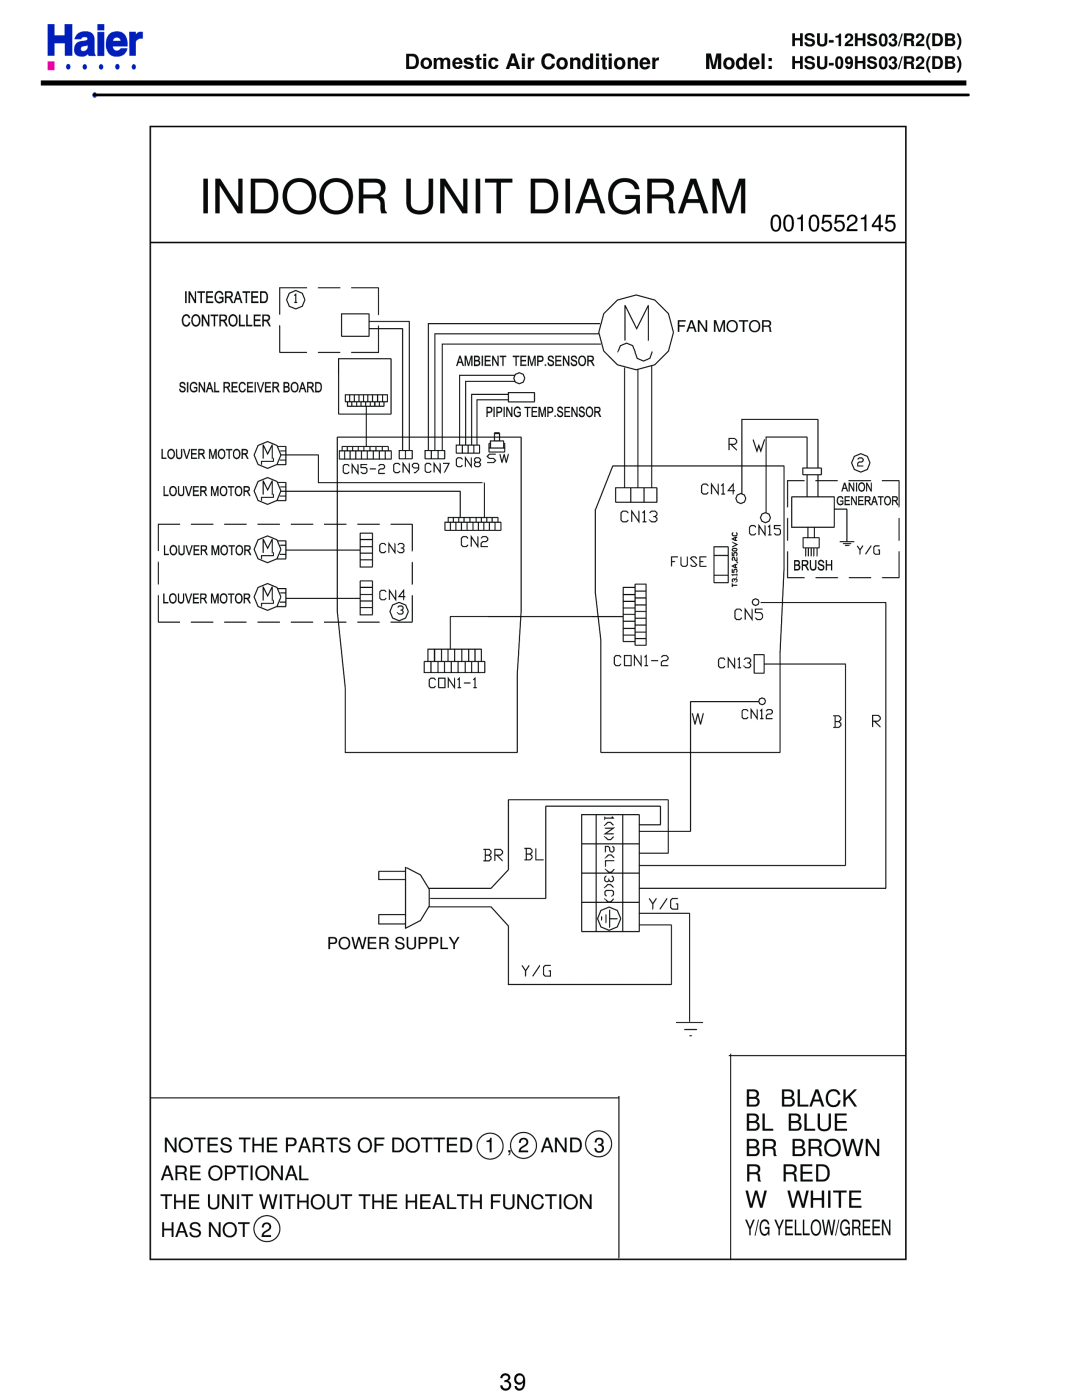 Haier HSU-12HS03/R2DB Indoor Unit Diagram, Black, Bl Blue, Br Brown, White, Domestic Air Conditioner, Are Optional 